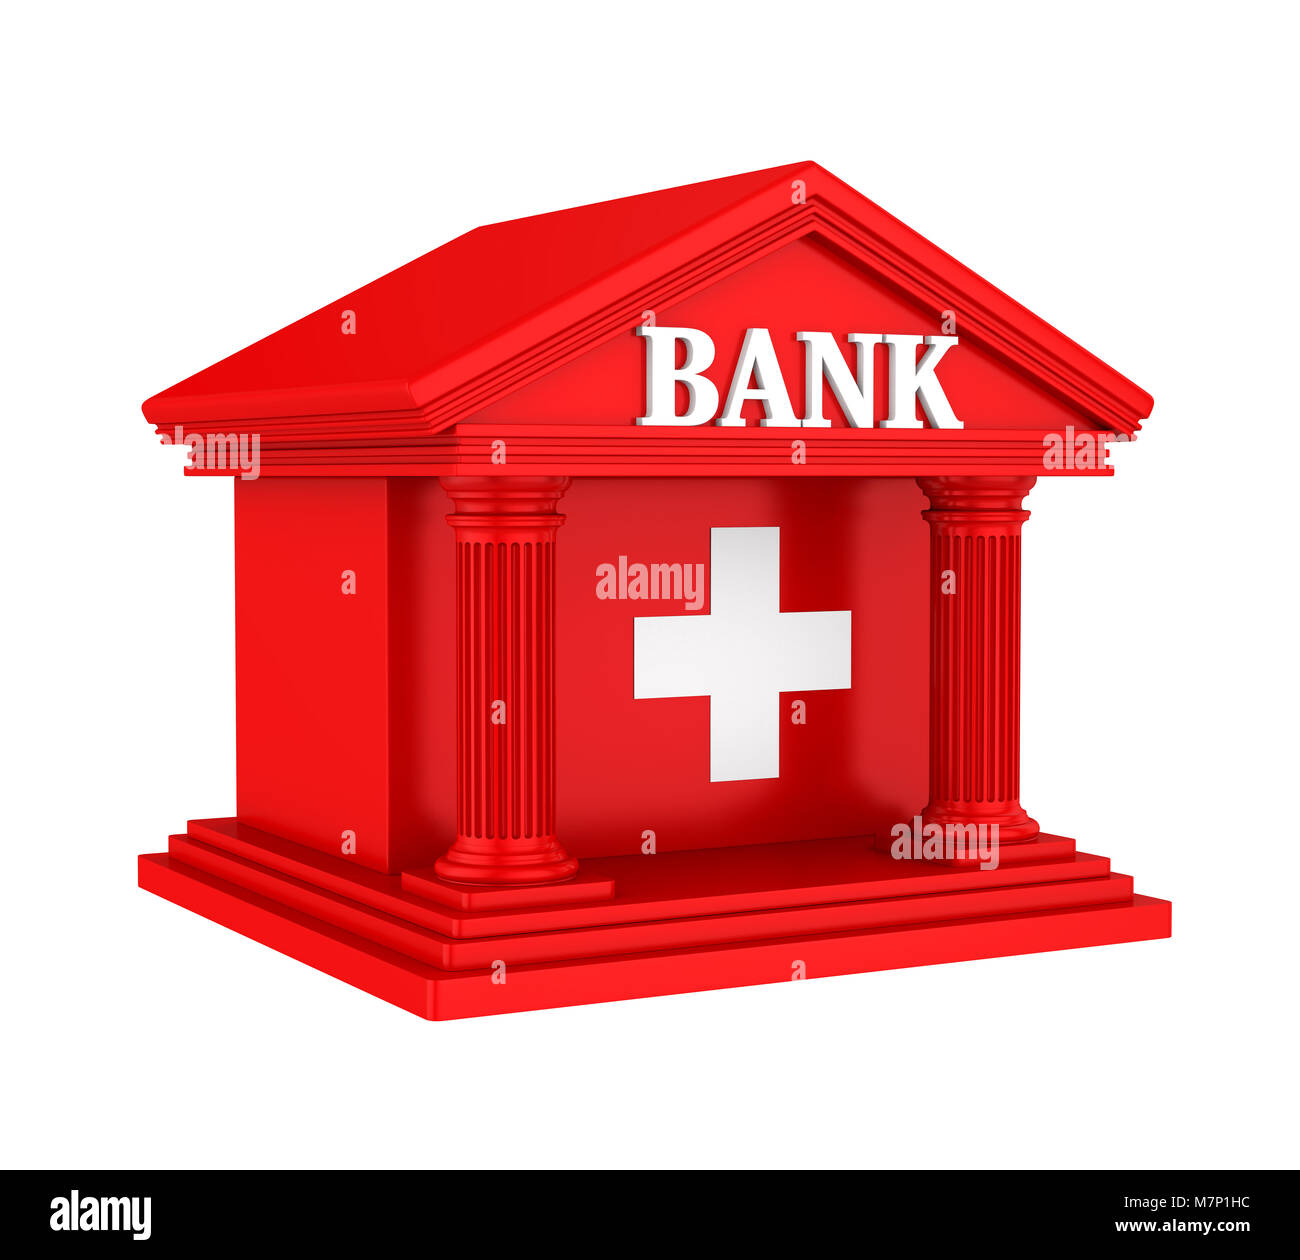 Swiss Bank Building Isolated Stock Photo